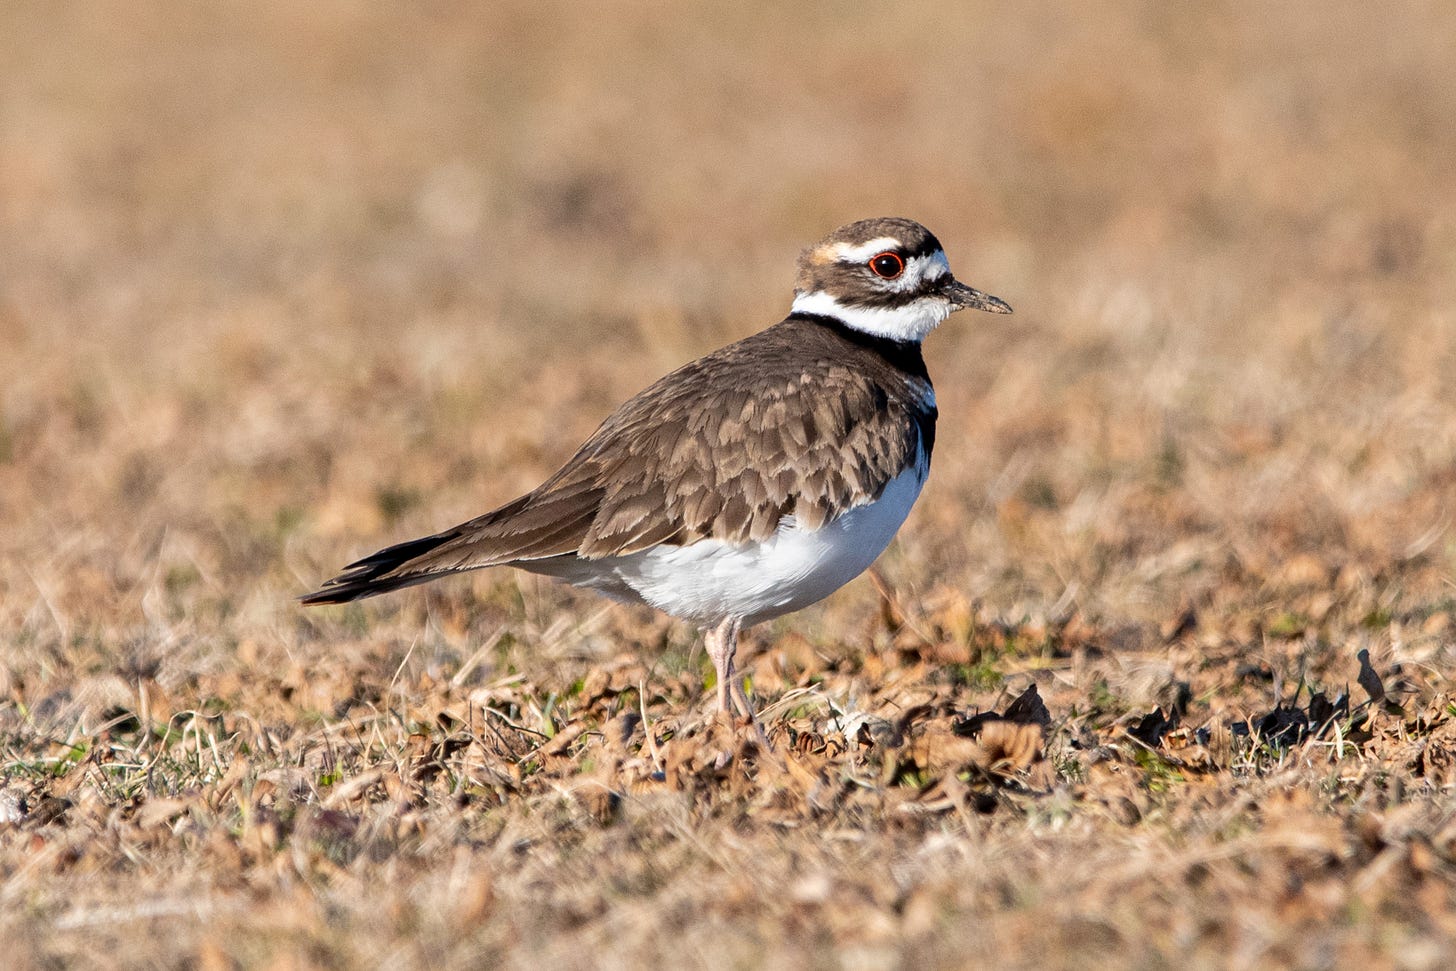 A kildeer in profile, standing in a field, its red-ringed eye fixing the viewer